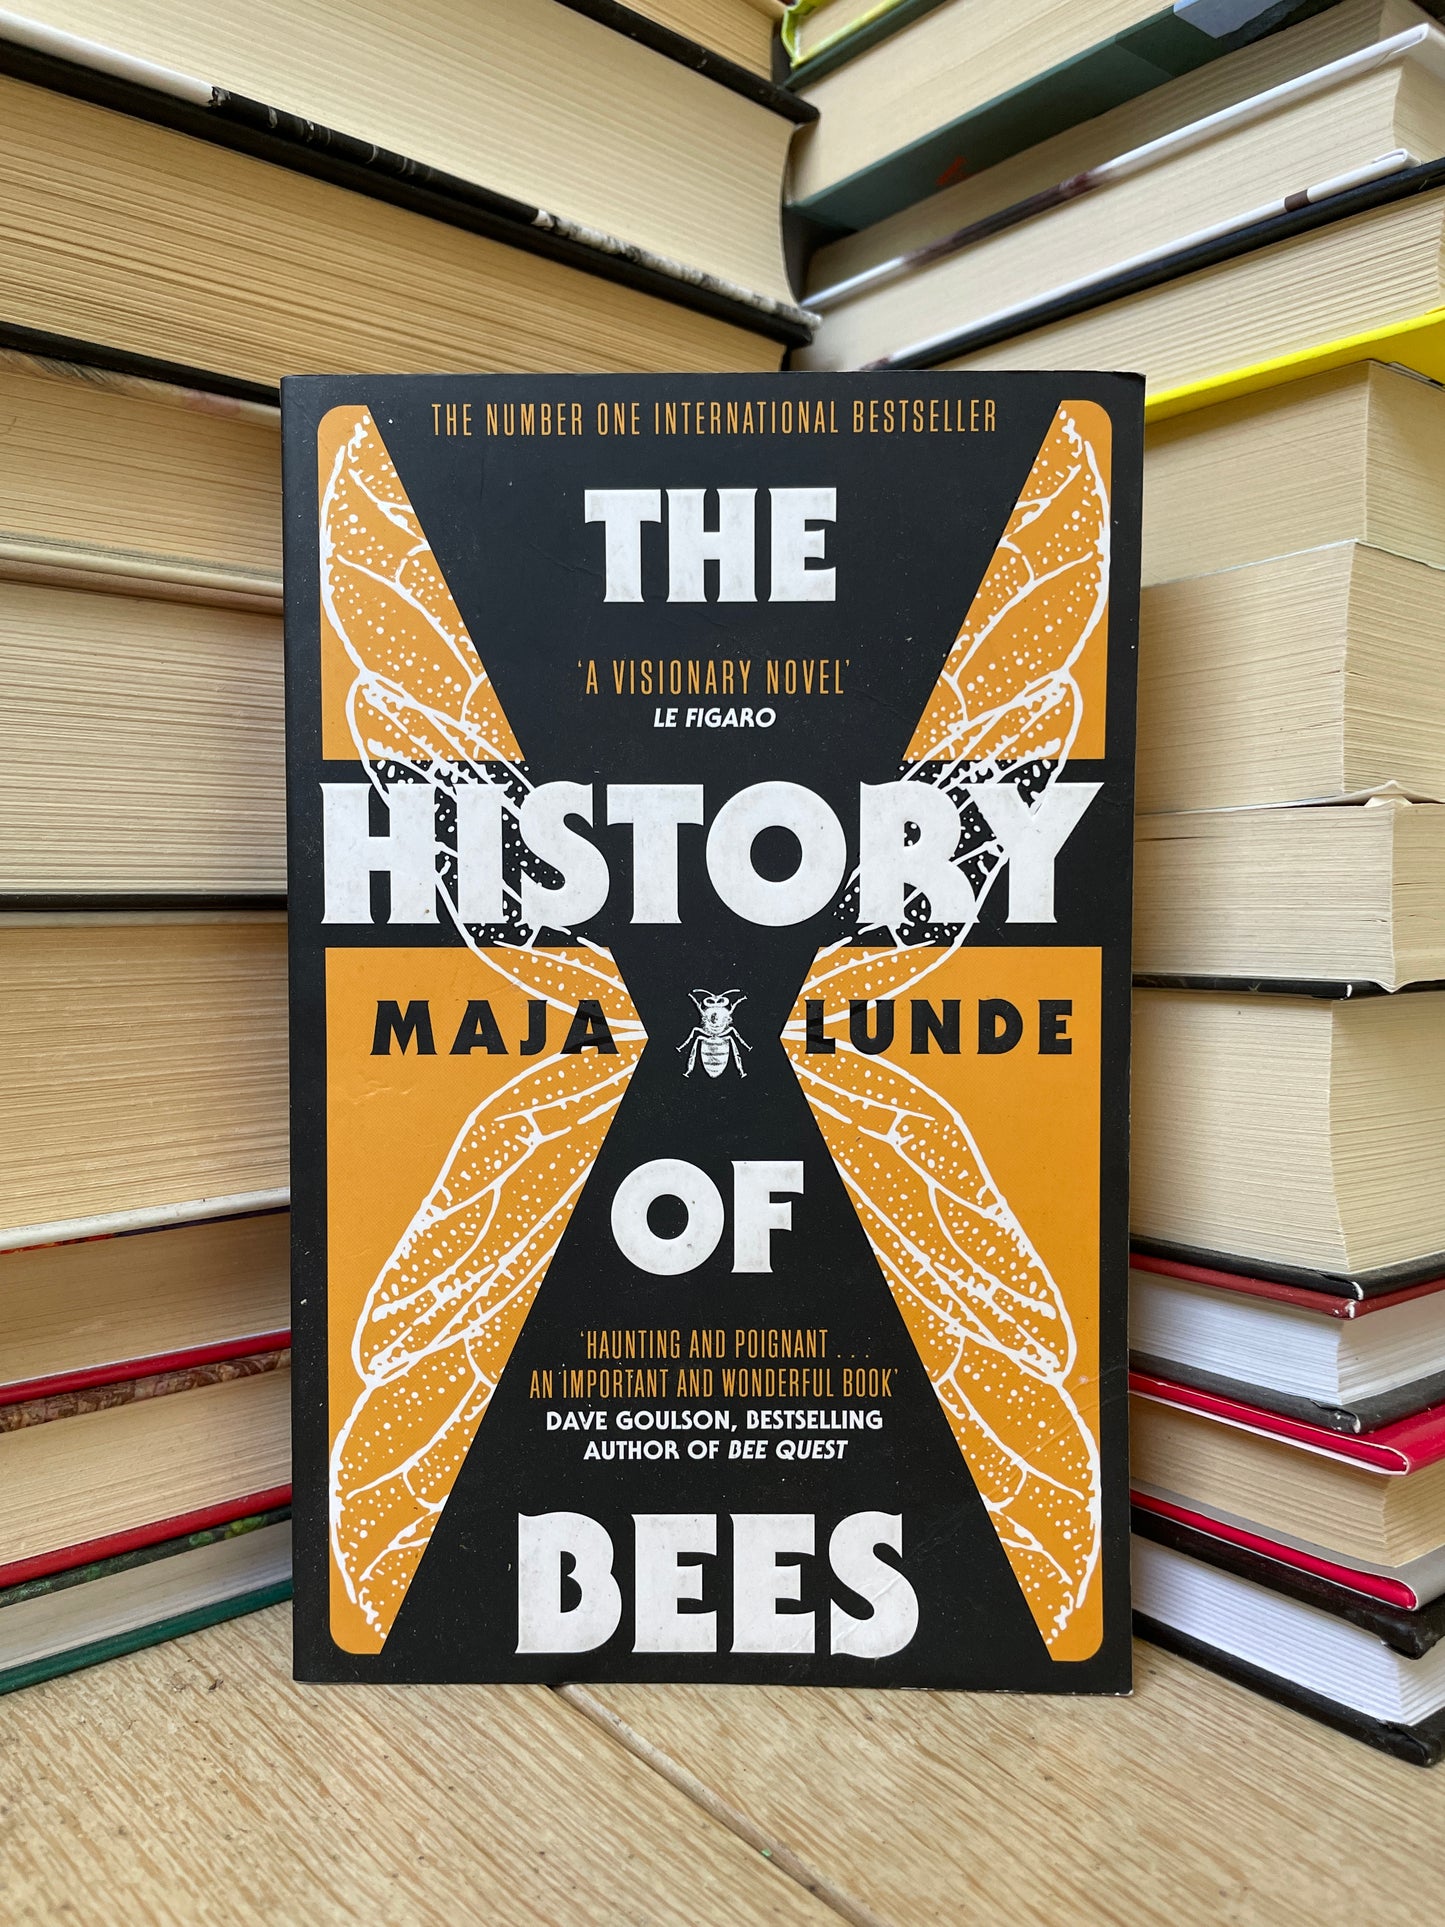 Maja Lunde - The History of Bees